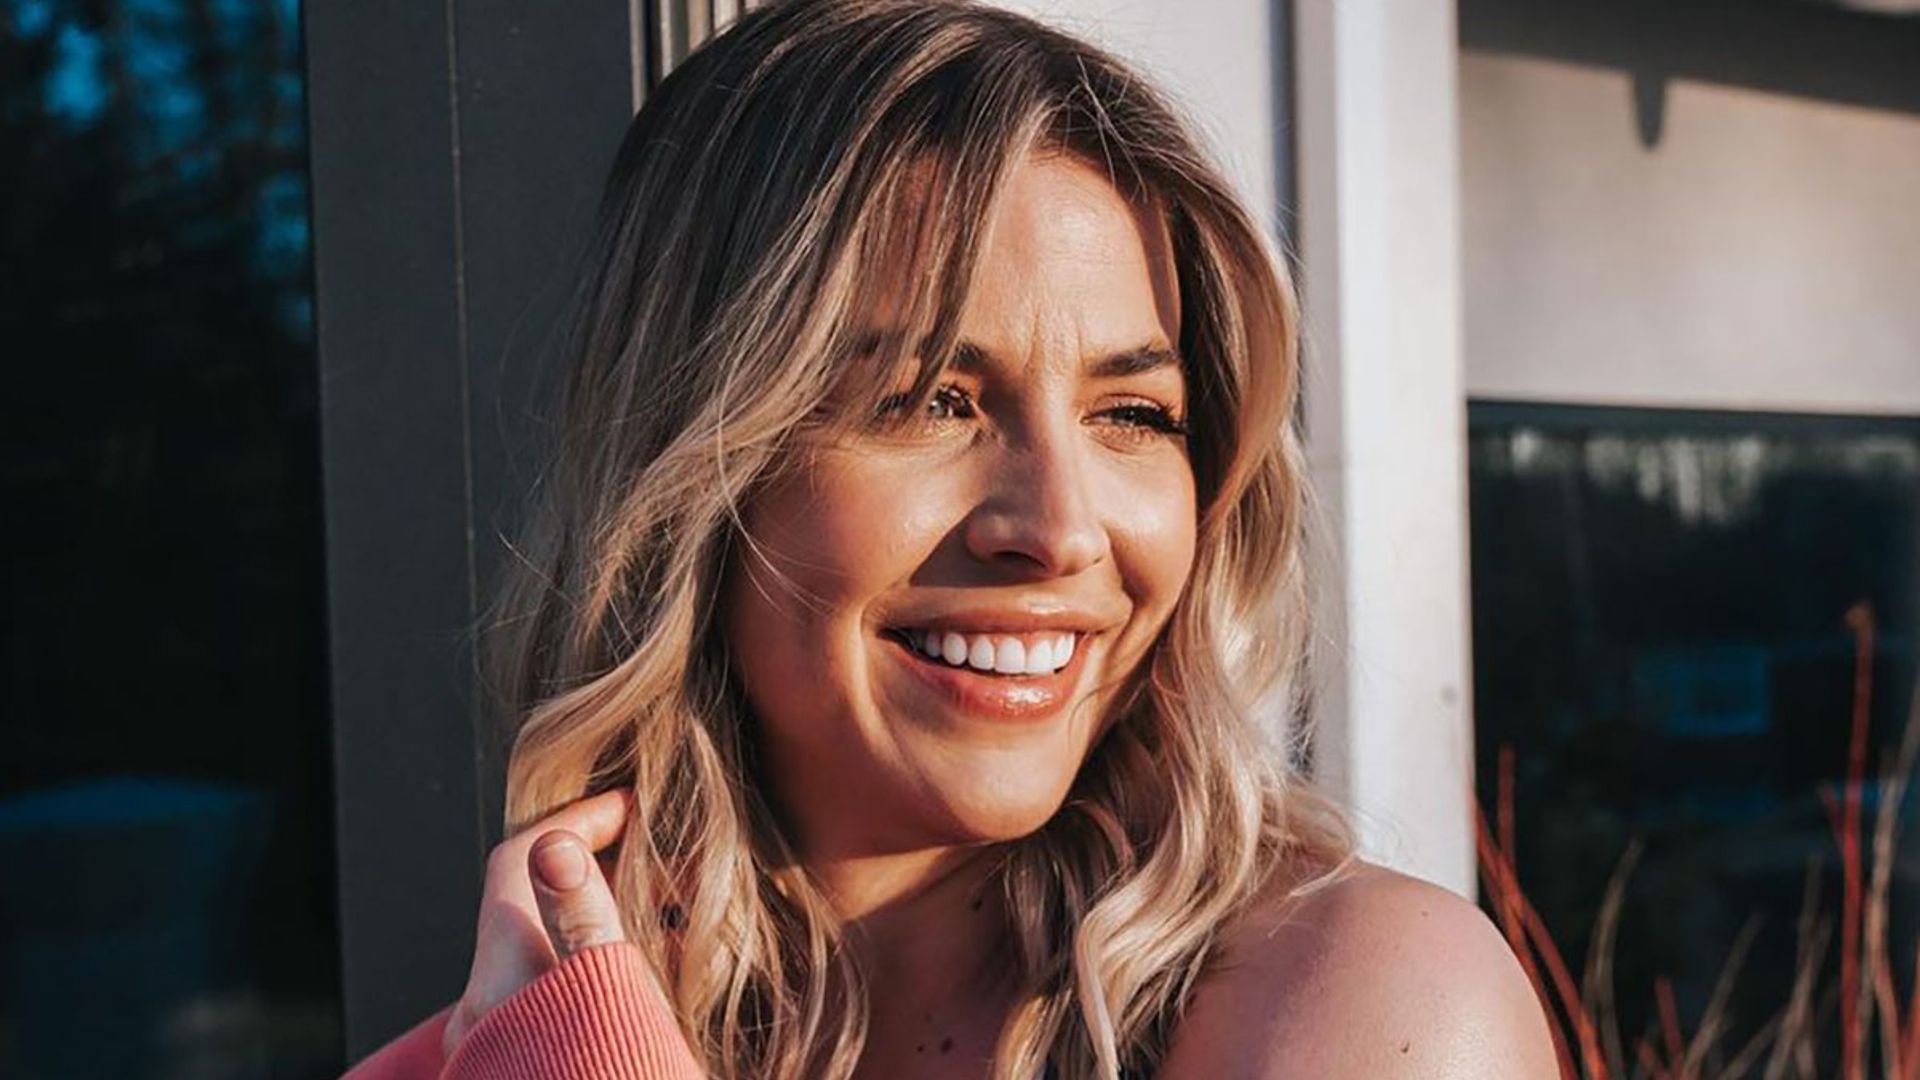 Gemma Atkinson shows off her teeth transformation – and fans are impressed